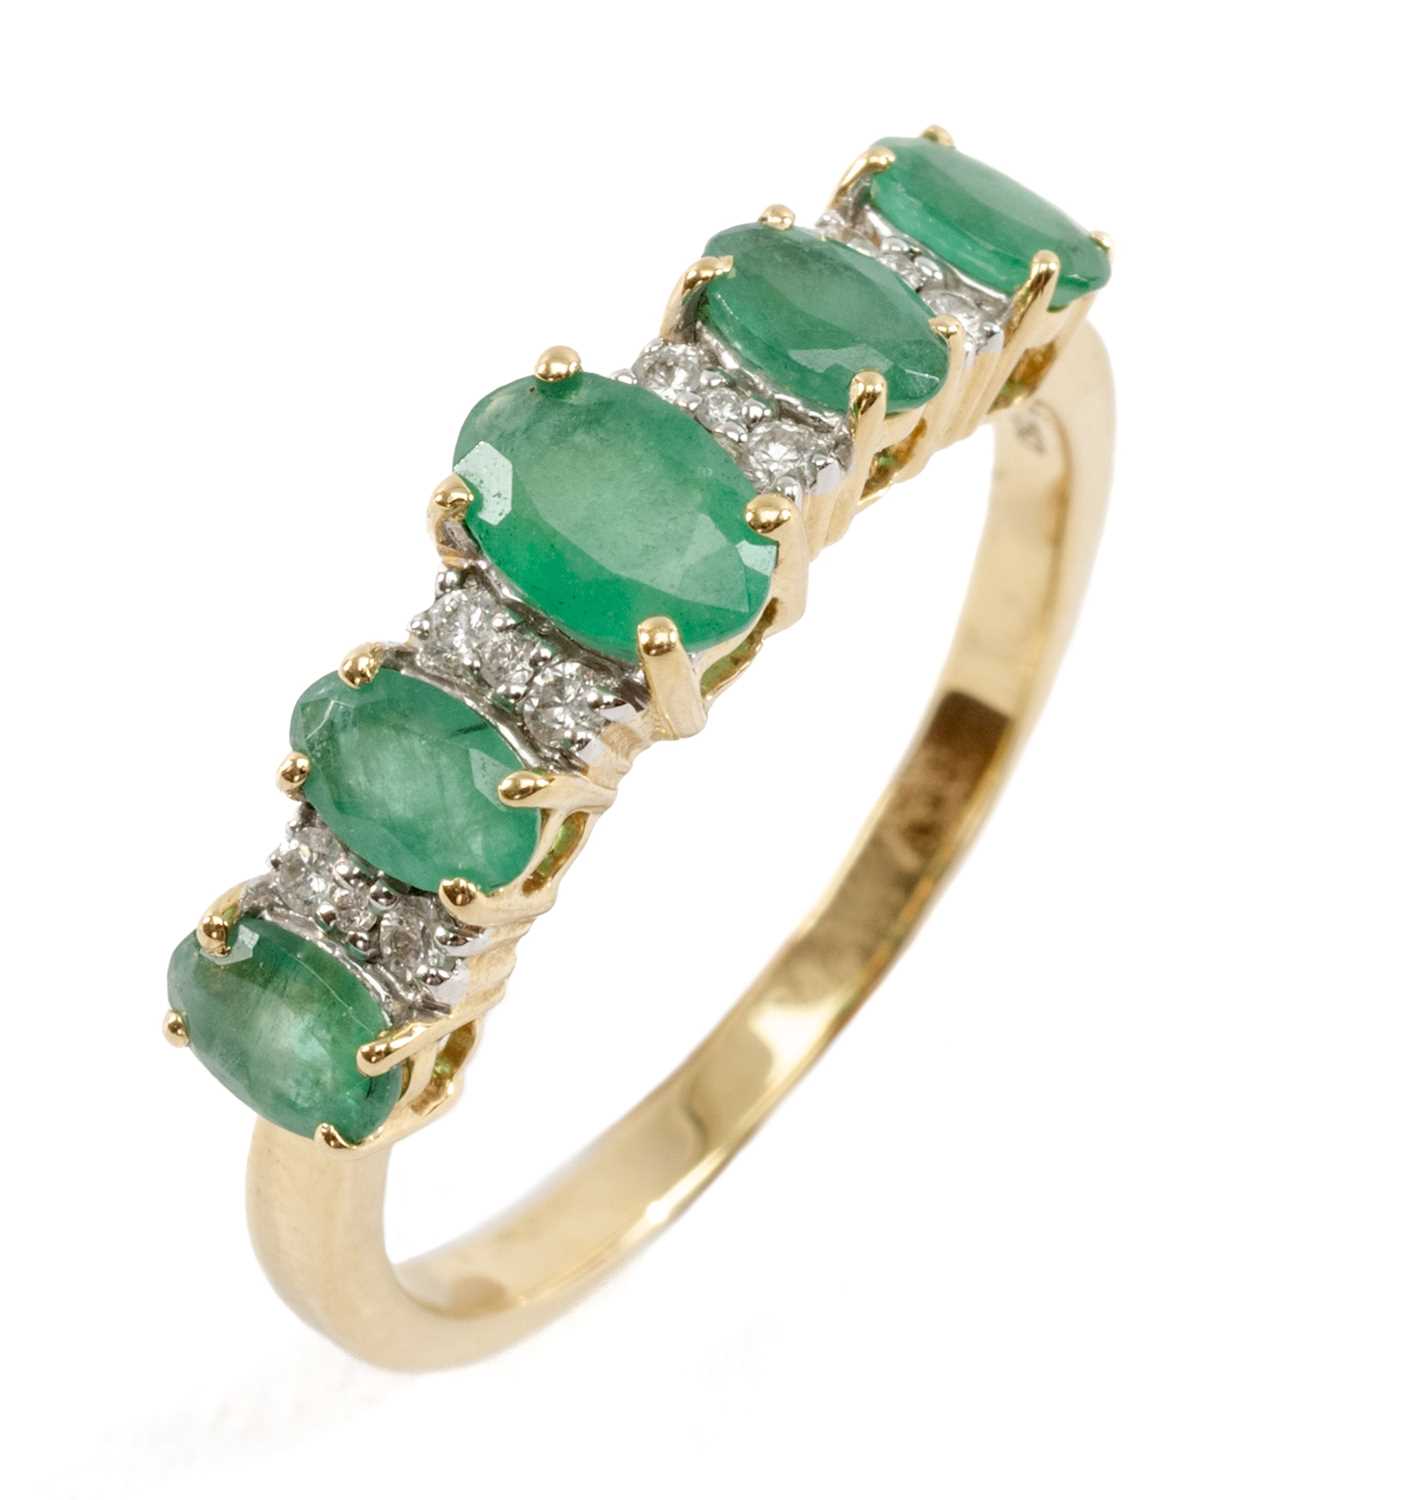 18CT GOLD FIVE STONE EMERALD & DIAMOND CHIP RING, ring size S, 4.2gms, in The Diamond Store ring box